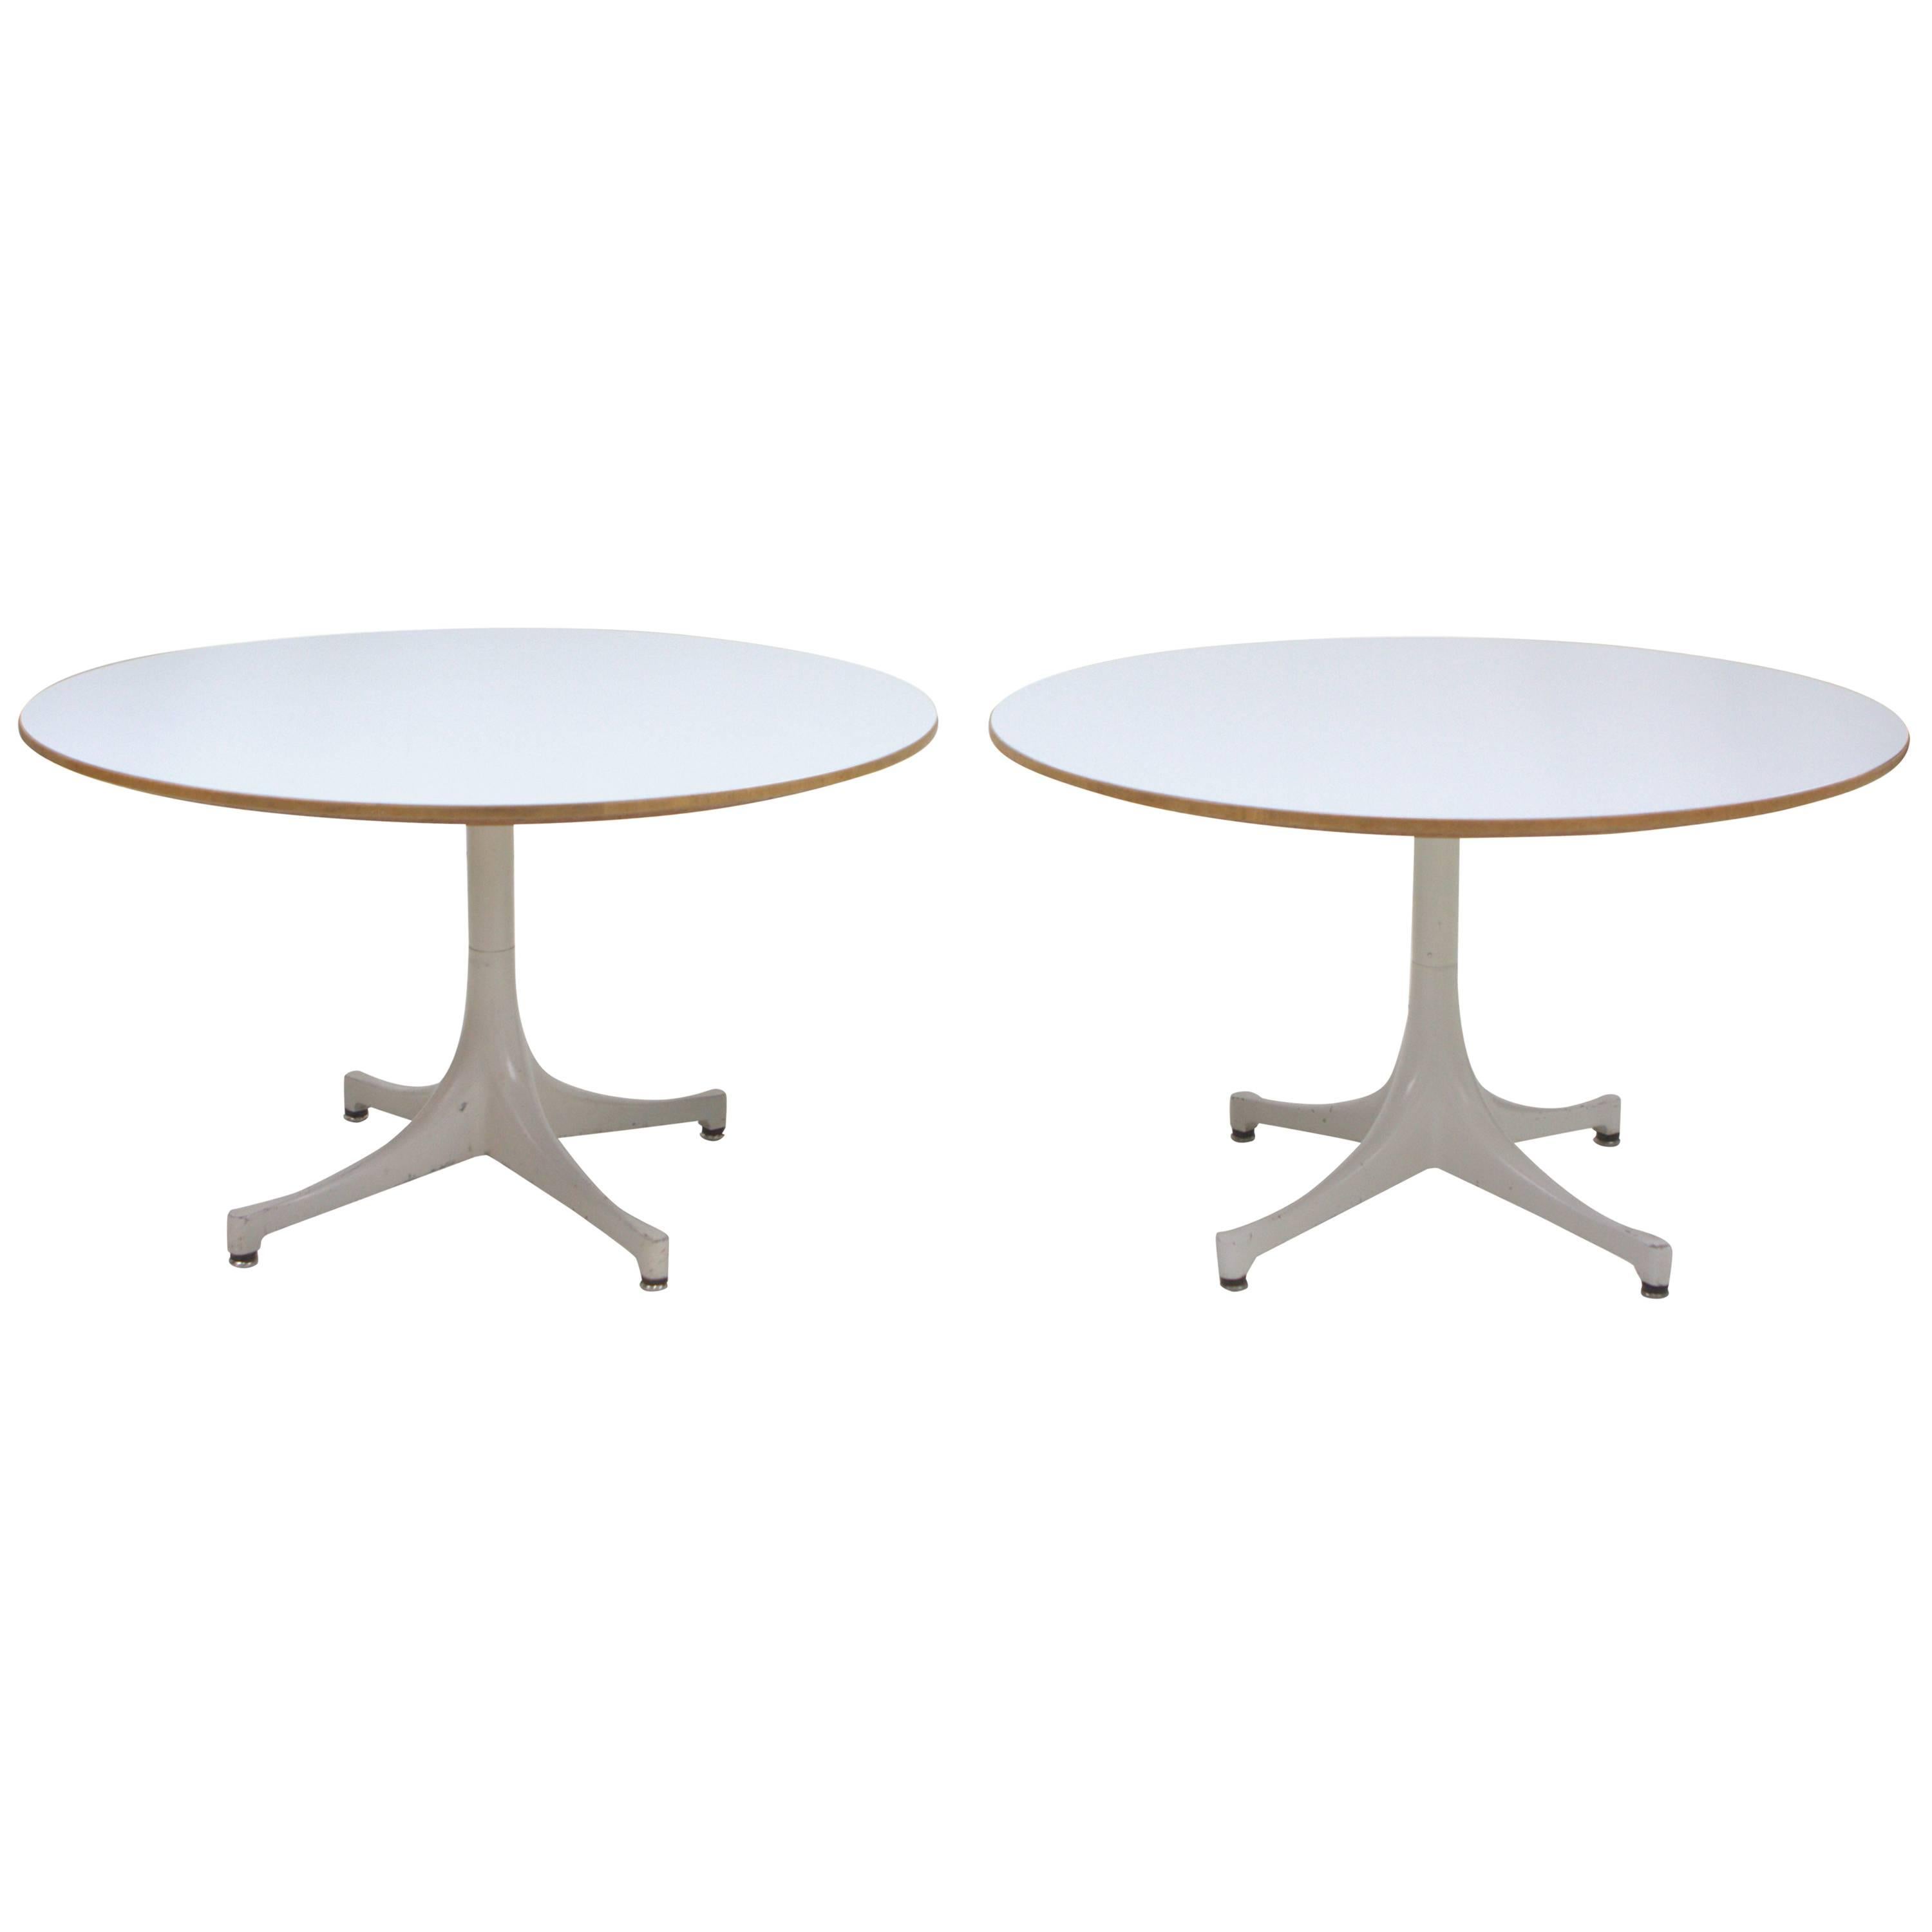 George Nelson Swag Leg End Tables, Pair for Herman Miller For Sale